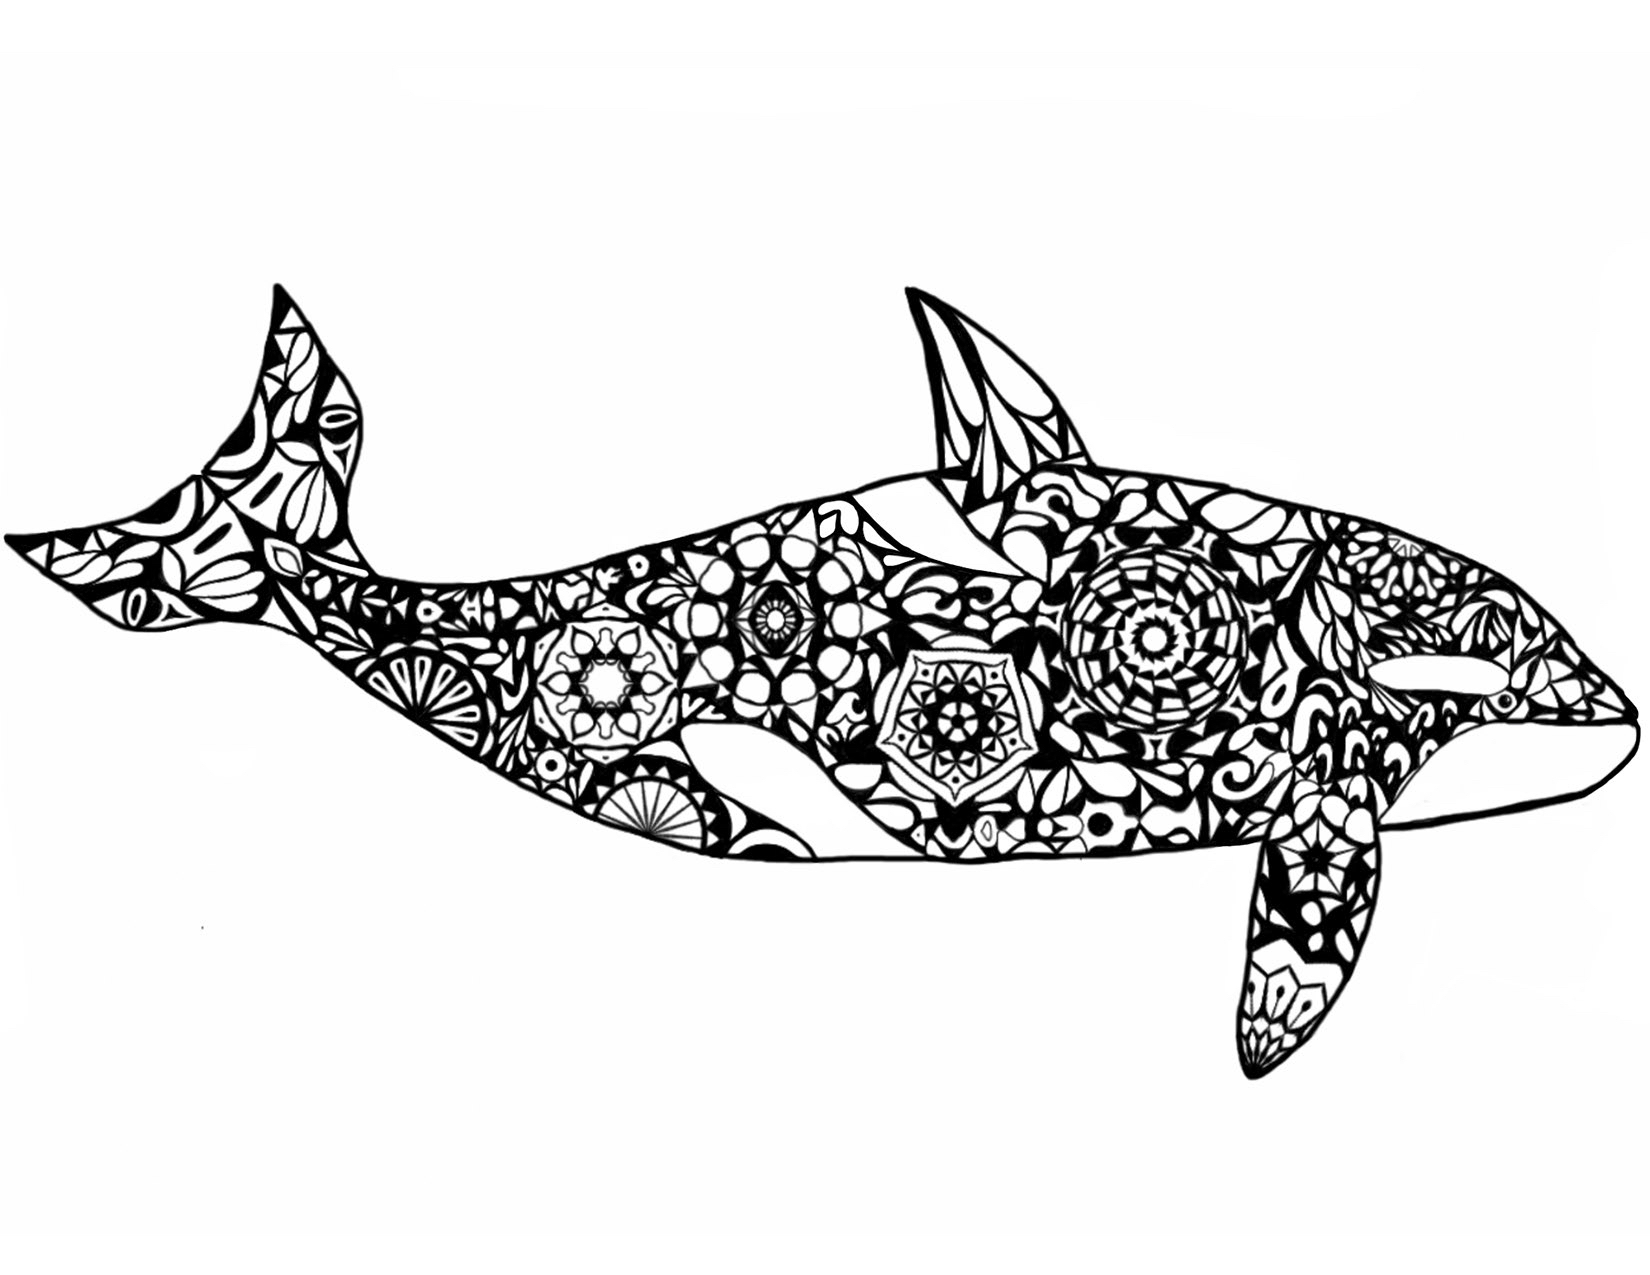 Orca Whale Mosaic Adult Coloring Page